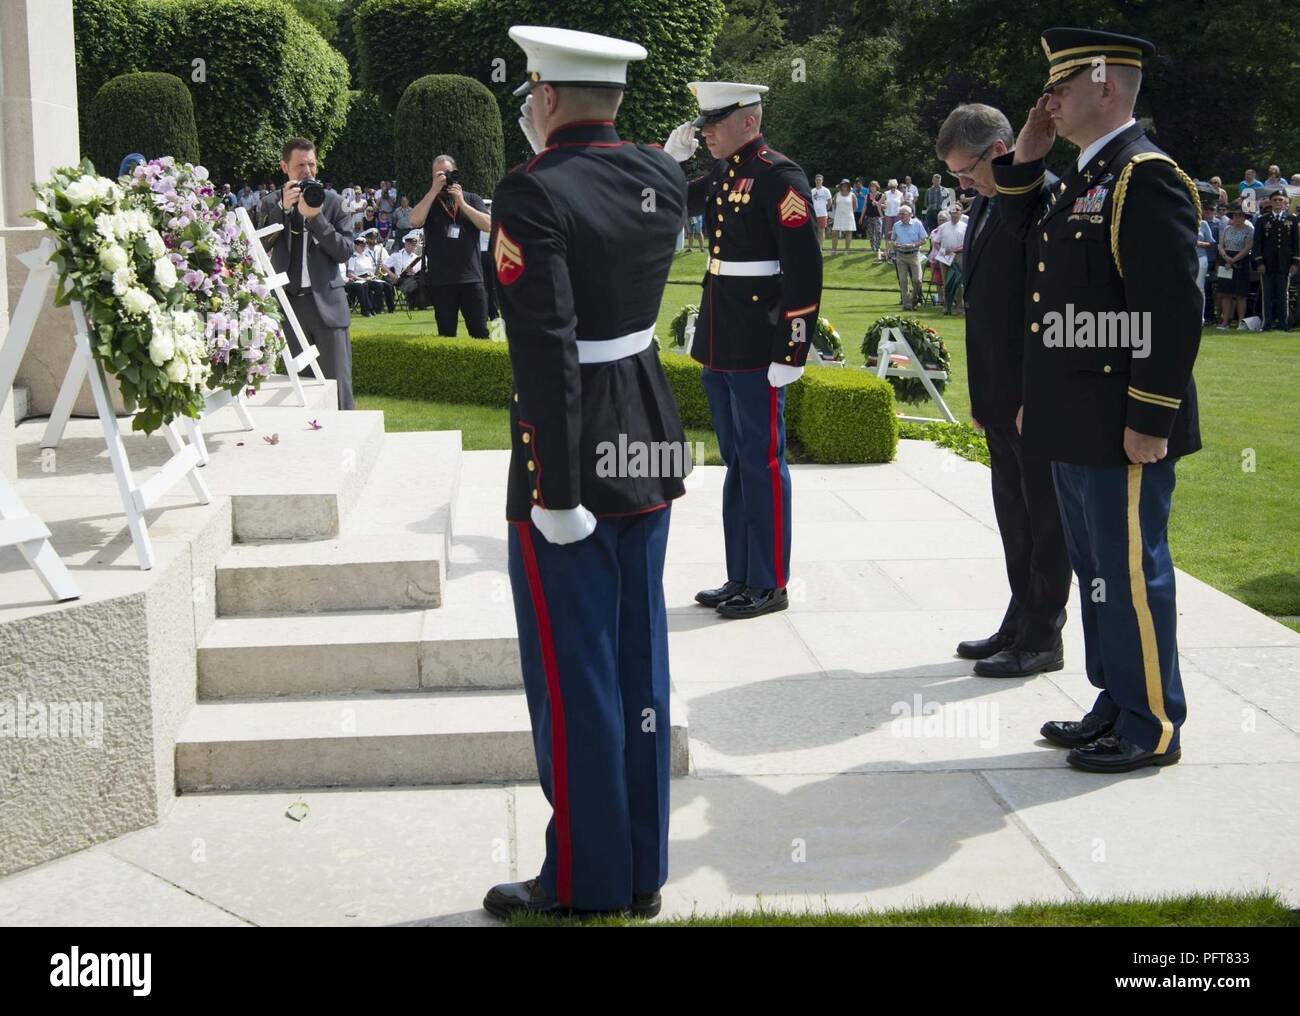 U.S. military and Steven Vandeput, center right, Belgian Minister of Defense, pay respects after laying a wreath in honor of the fallen during a Memorial Day ceremony at Flanders Field American Cemetery, Belgium, May 27, 2018. Military and civilian representatives attended the ceremony, including Brig. Gen. Dieter E. Bareihs, Headquarters U.S. Air Forces in Europe and Africa director of plans, programs and analyses, and a representative of the King of Belgium. Stock Photo